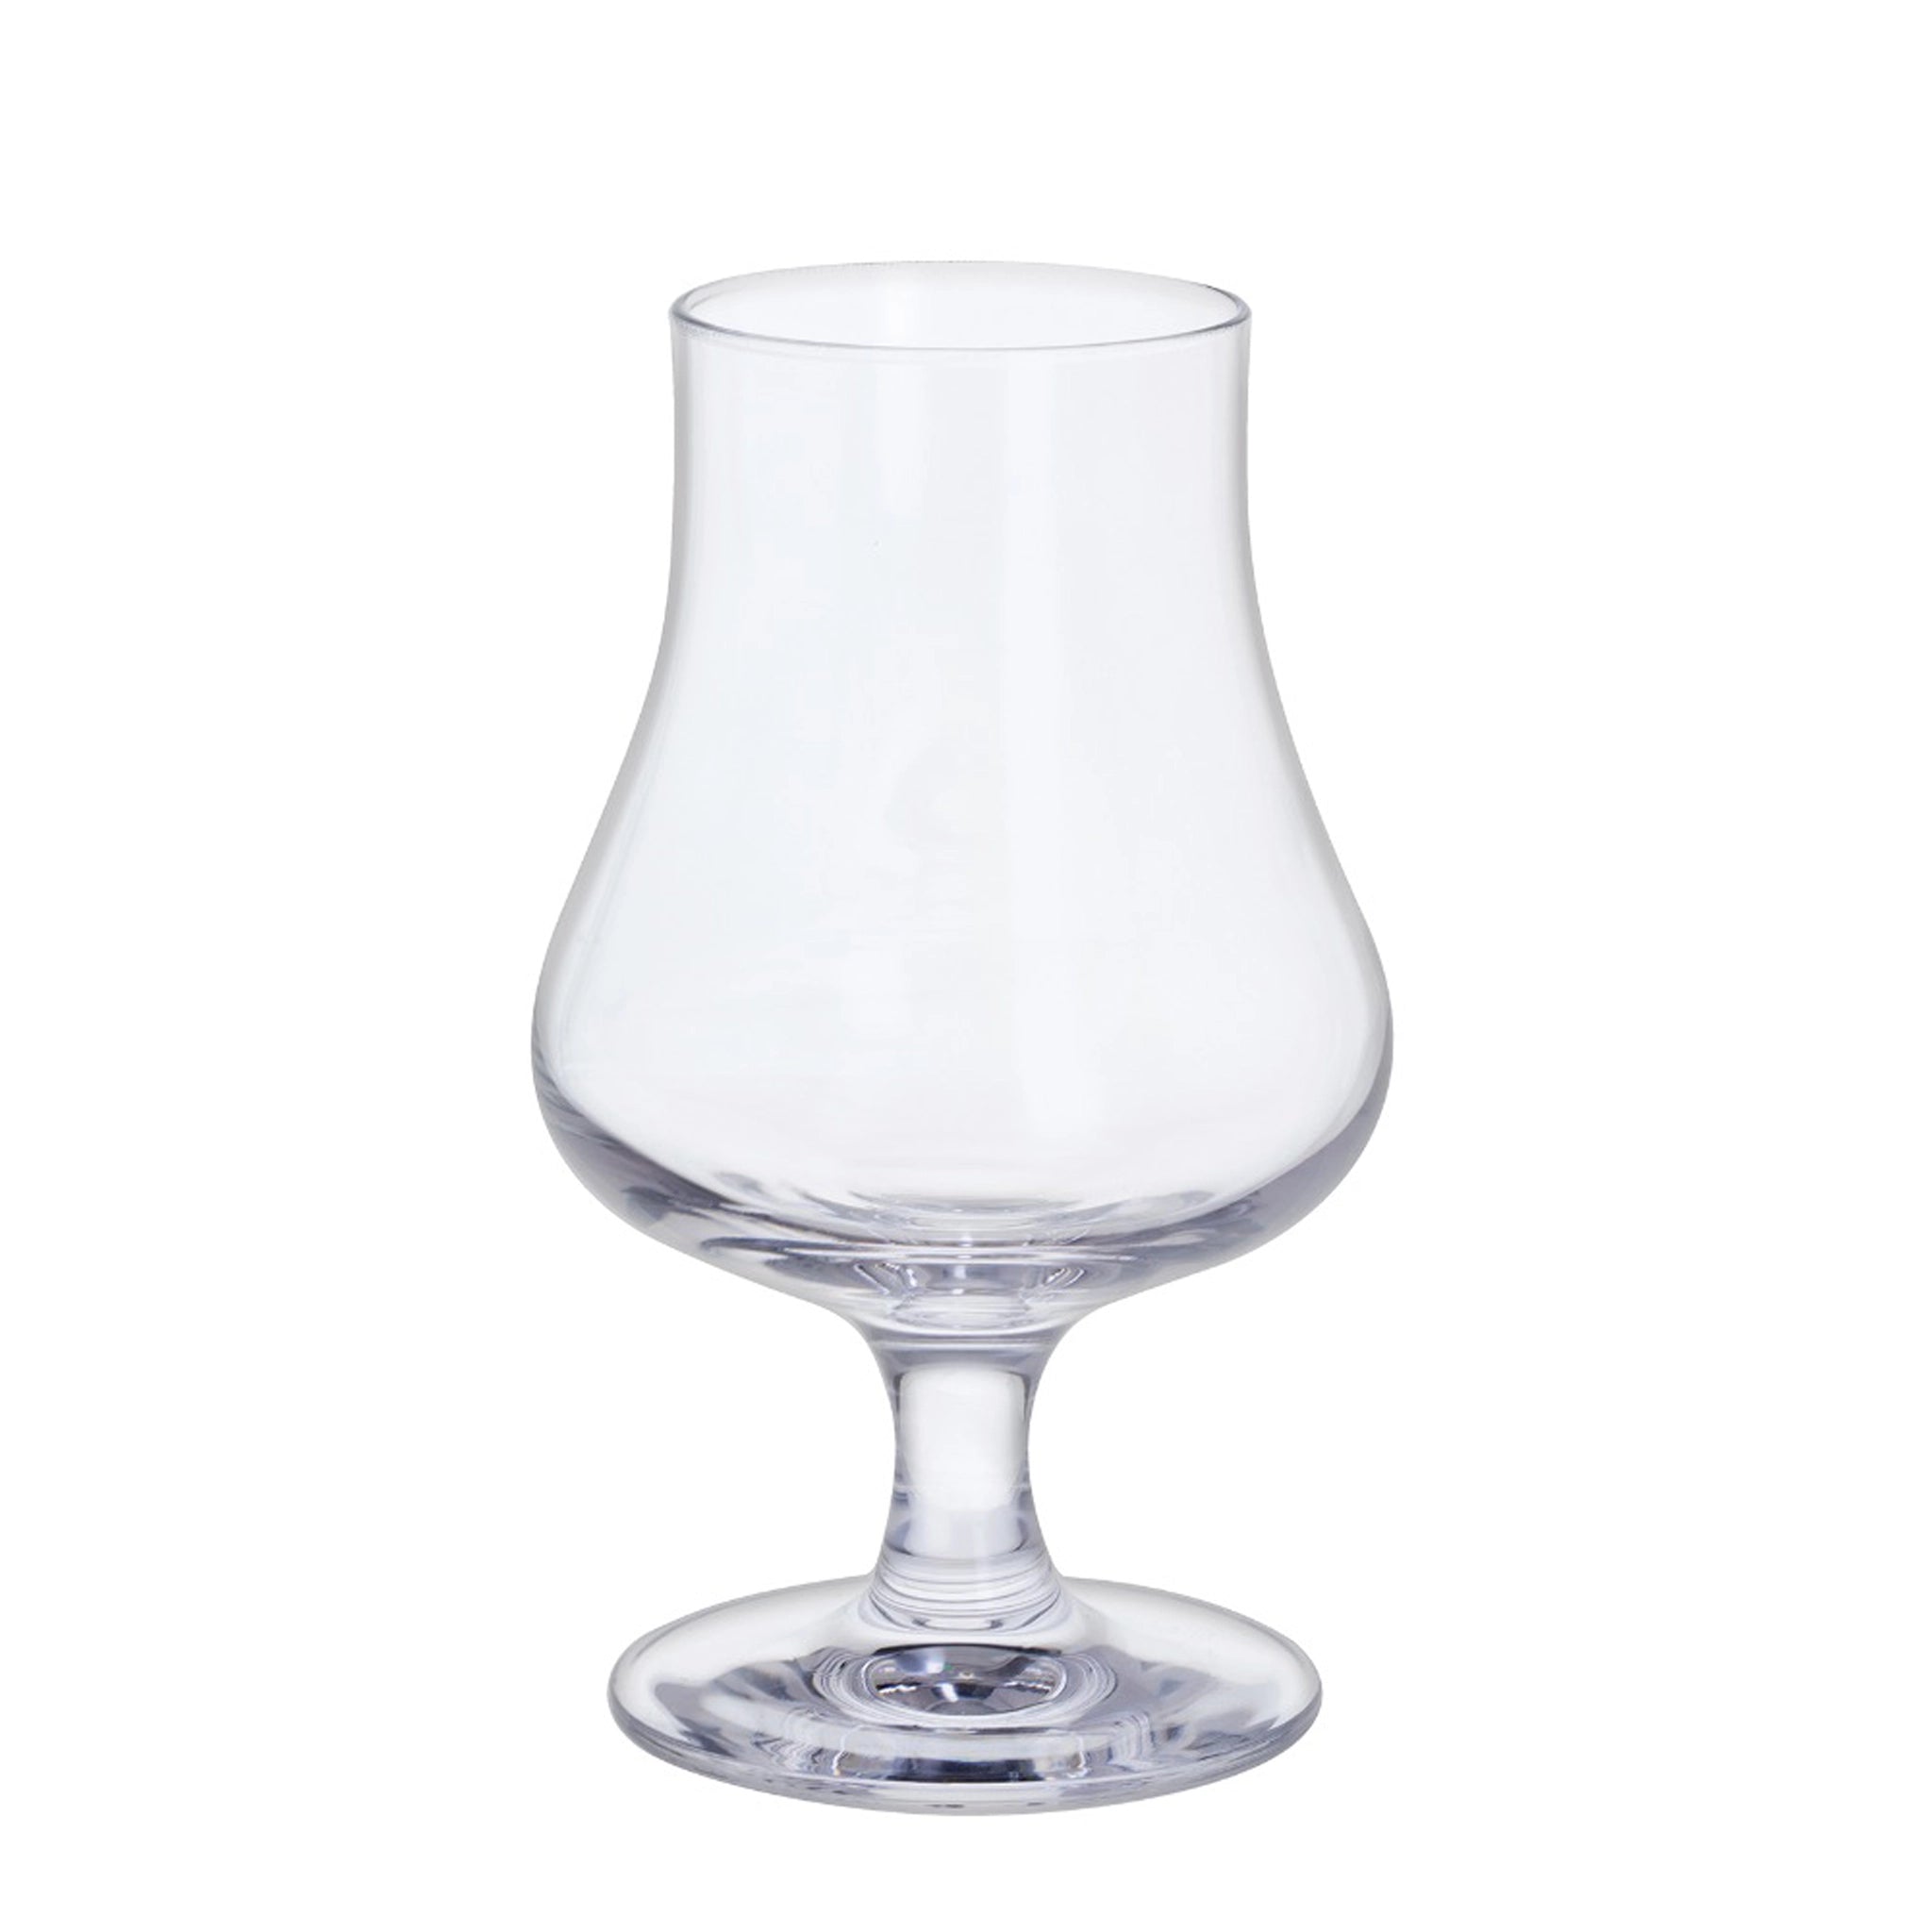 Stemmed whisky nosing glass with wide base and a tapered top